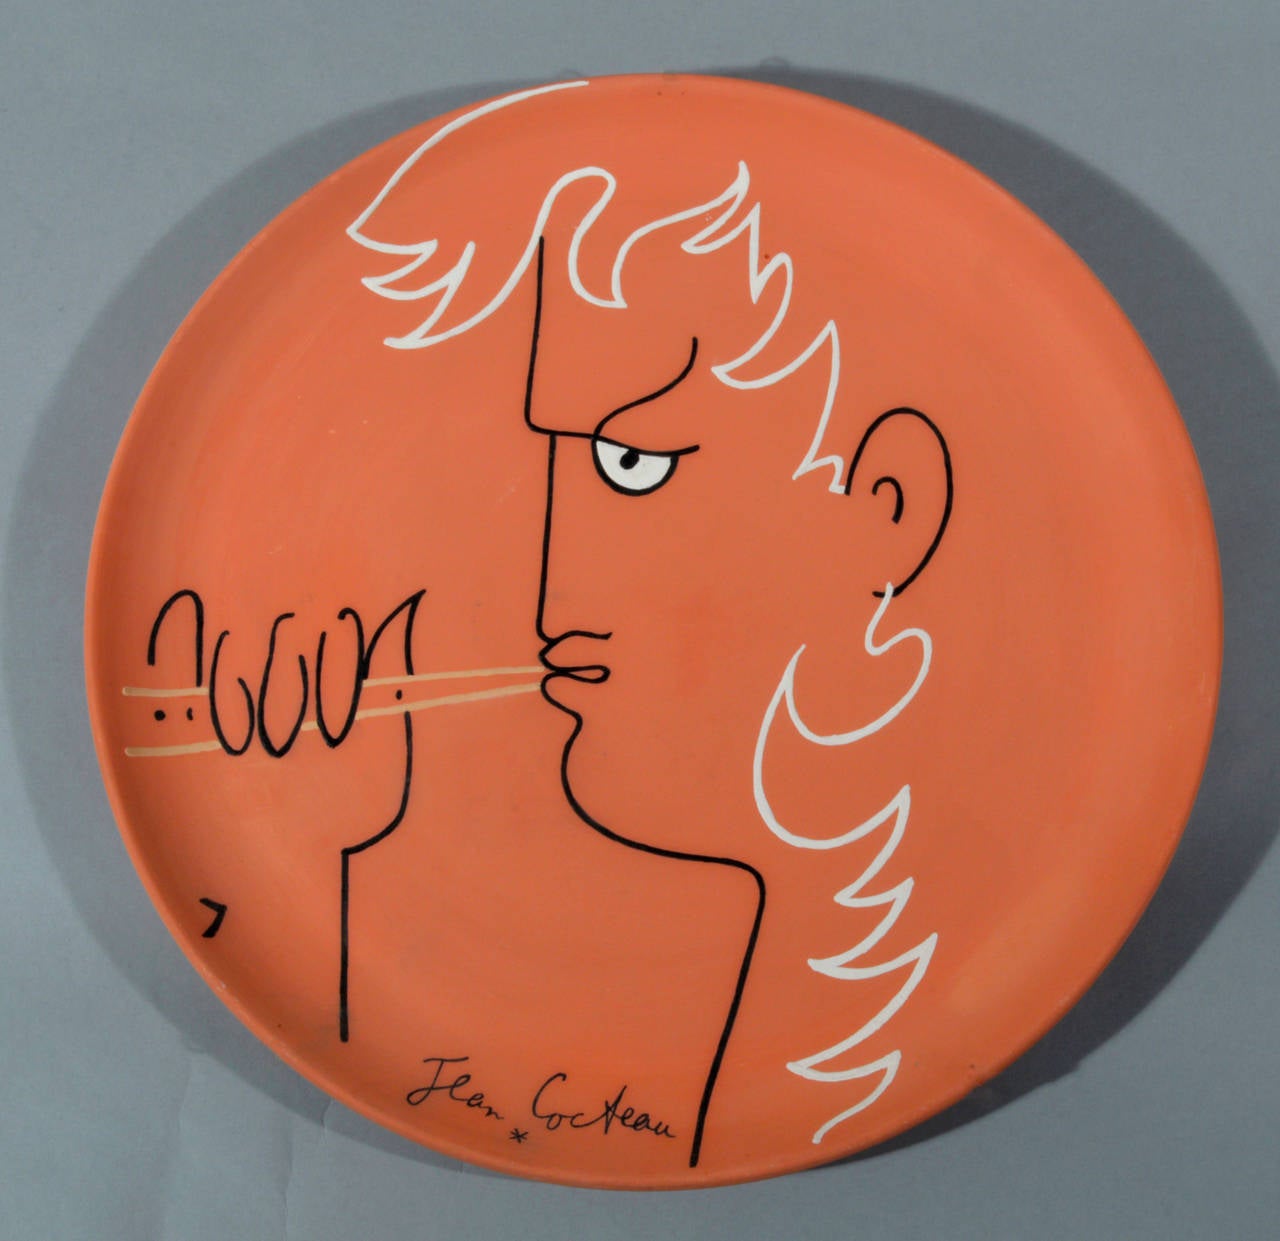 By Jean Cocteau (1889-1963).
Signed, dated 'Jean Cocteau, 1958' (lower center edge).

Painted and partially glazed terracotta dish.

Marks: Signed and dated on front;
On reverse inscribed Edition Originale de Jean Cocteau, Atelier